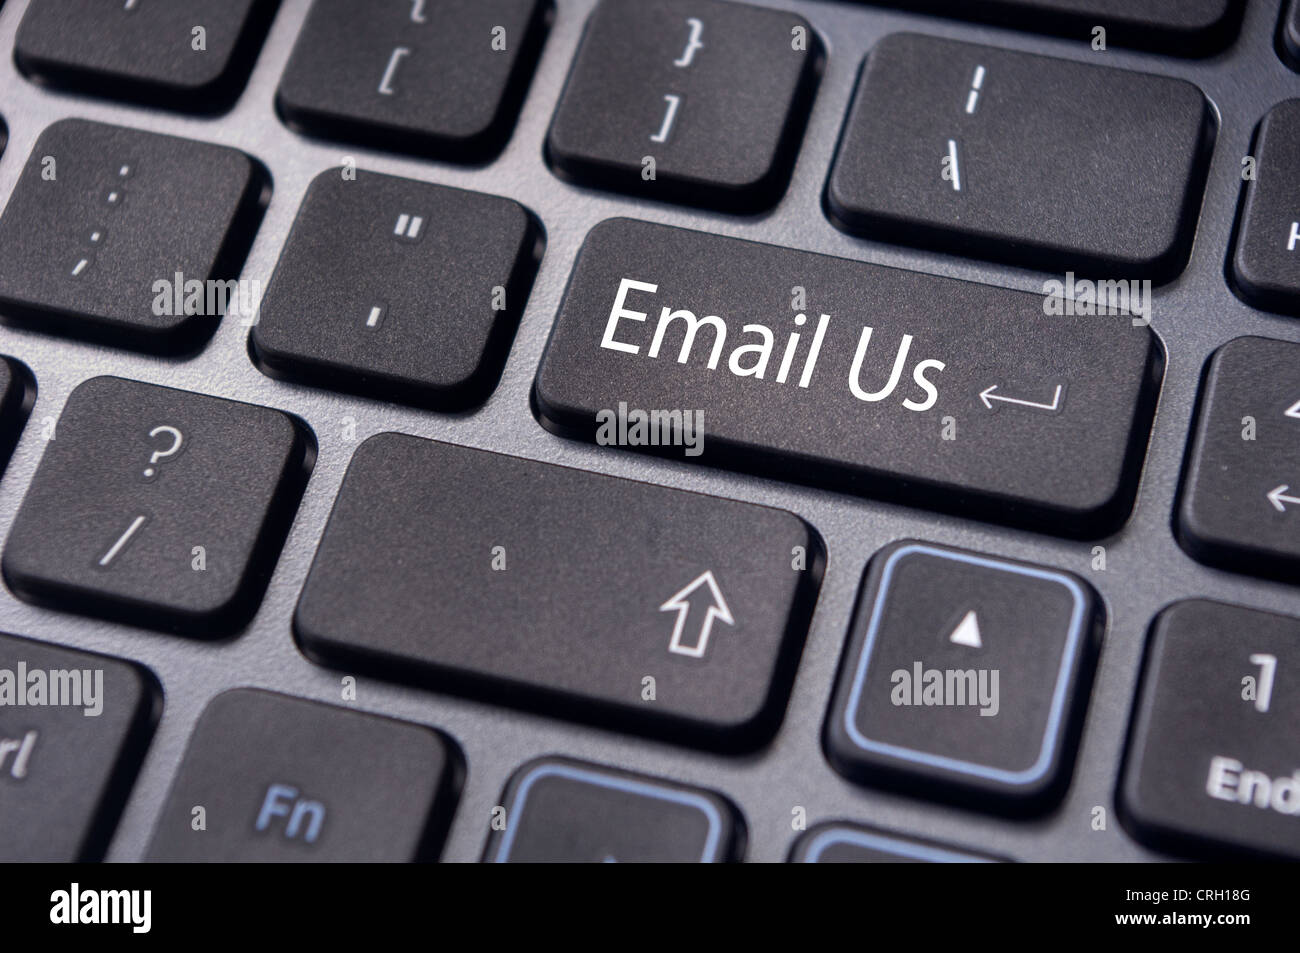 online customer service with 'email us' message on computer keyboard. Stock Photo